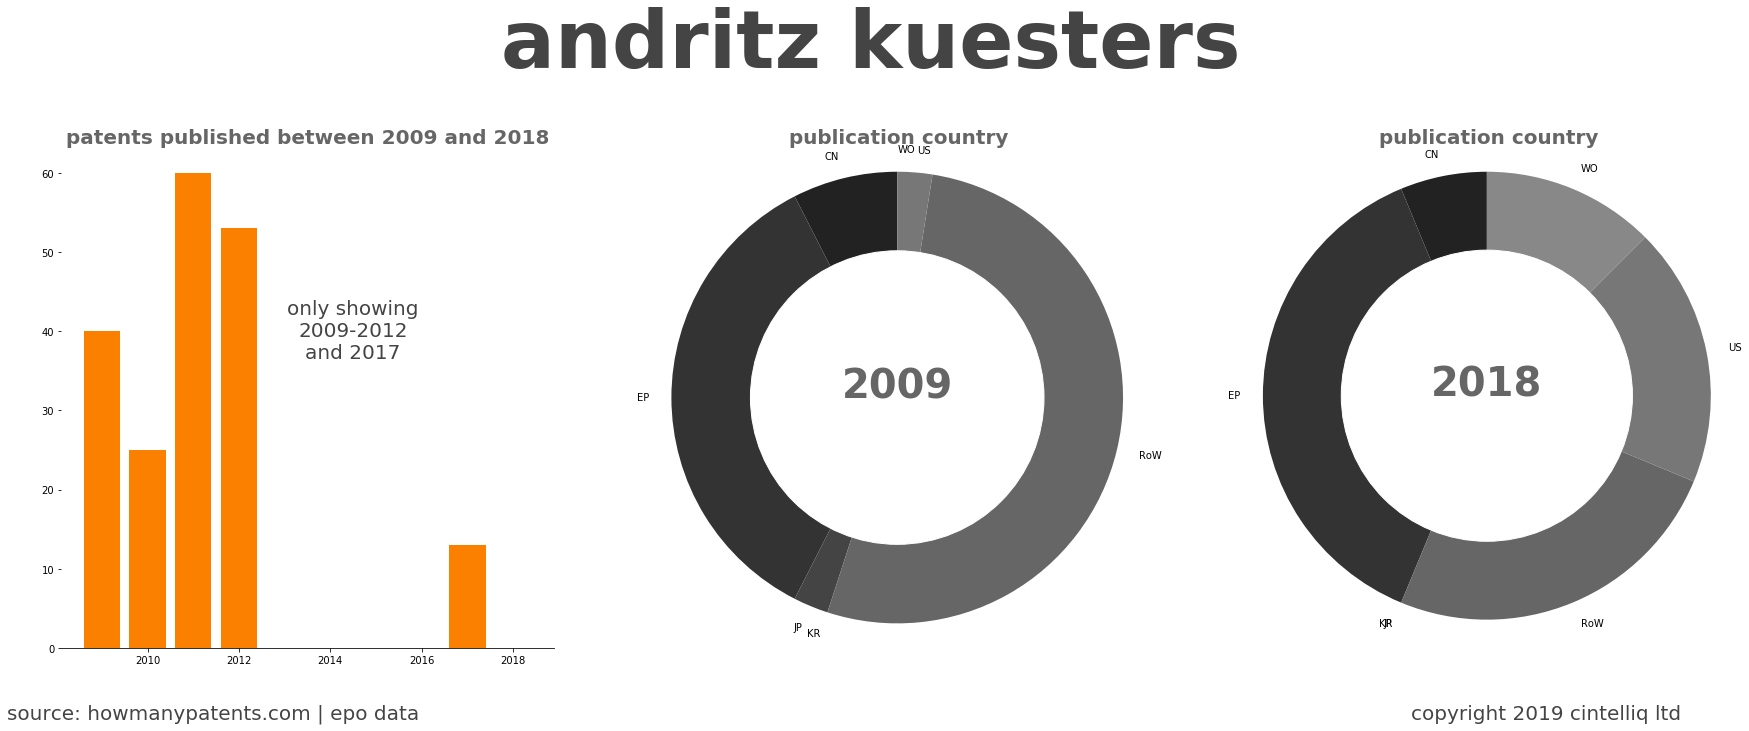 summary of patents for Andritz Kuesters